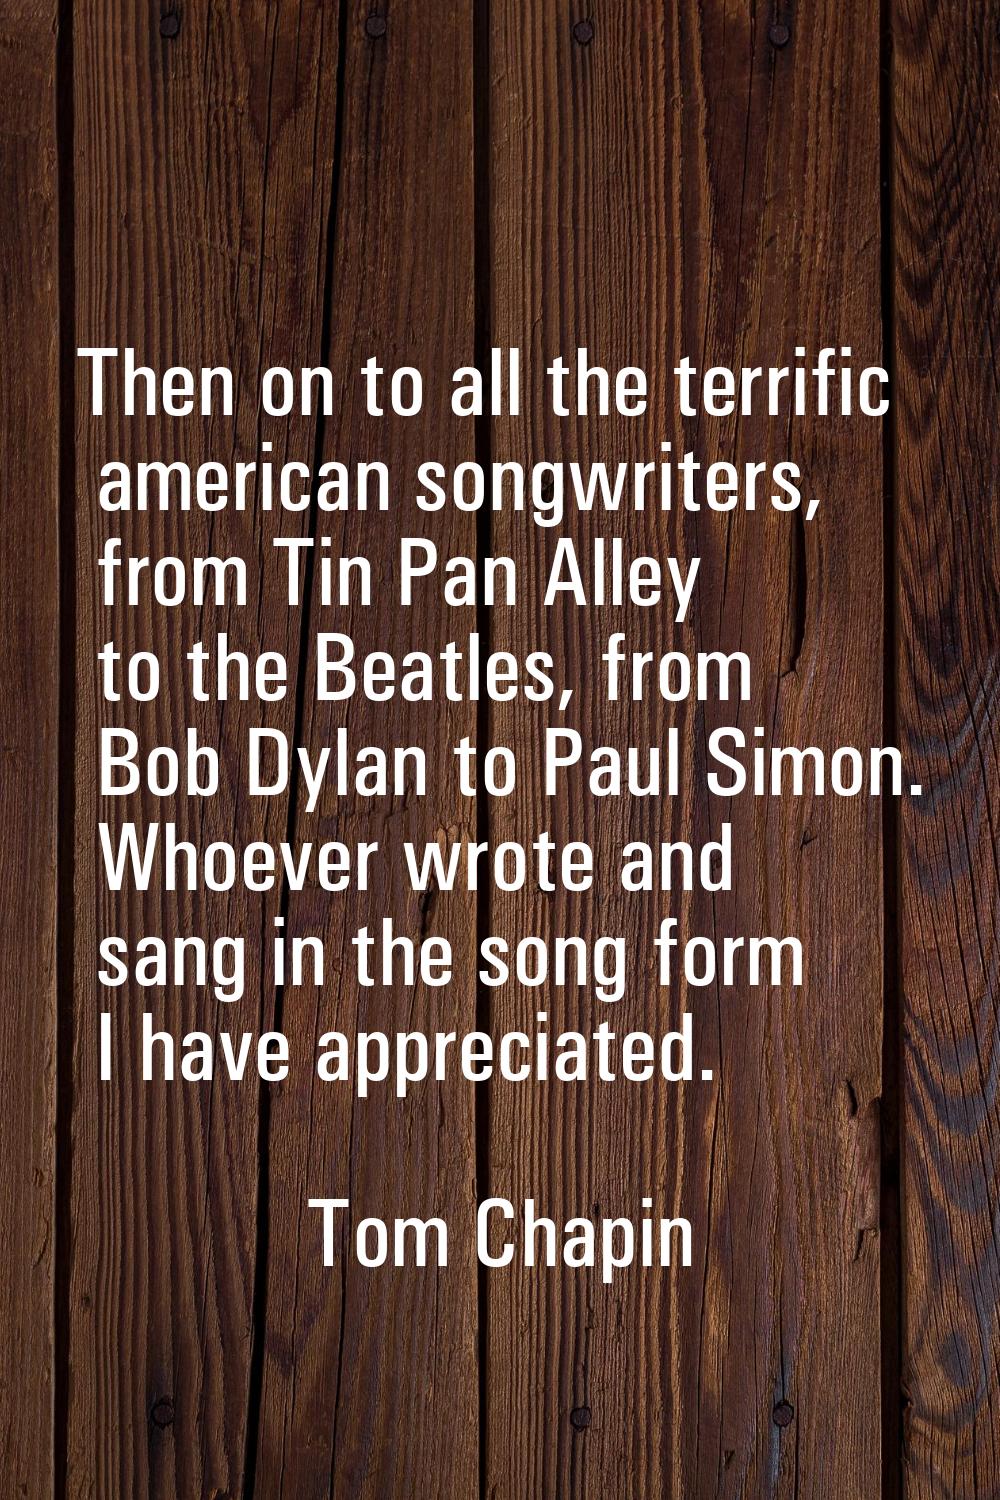 Then on to all the terrific american songwriters, from Tin Pan Alley to the Beatles, from Bob Dylan